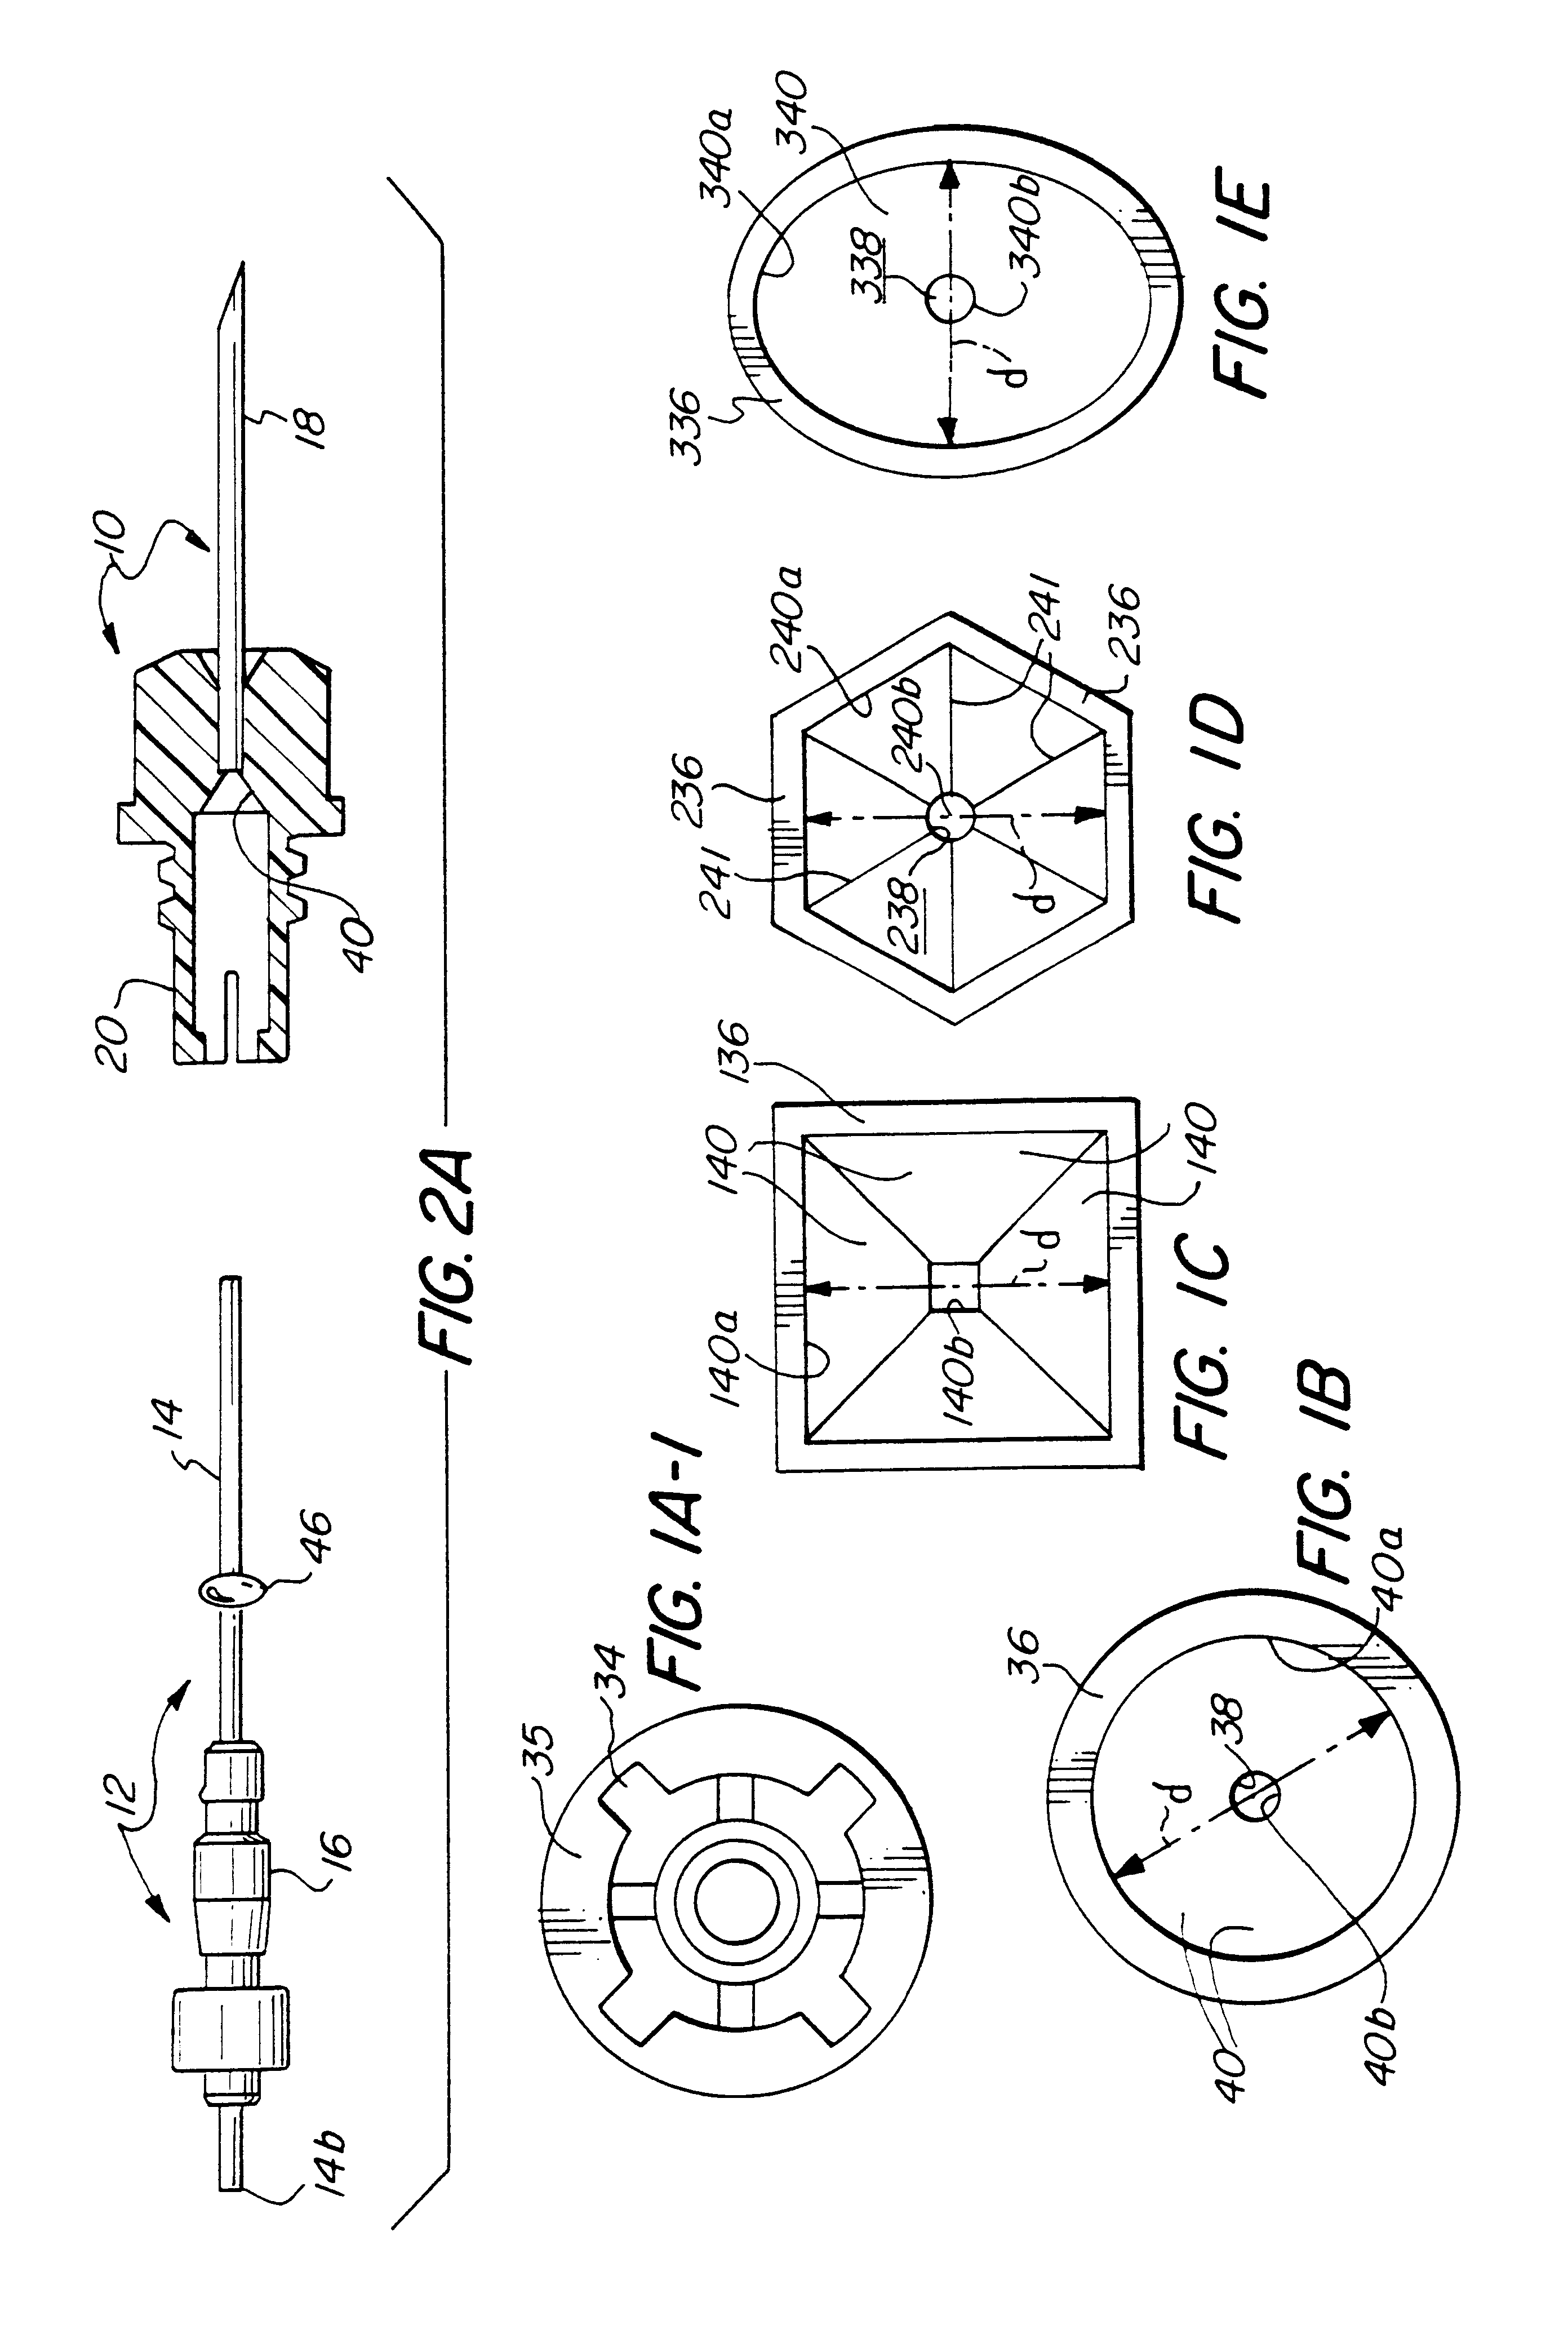 Self-blunting needle medical devices and methods of manufacture thereof